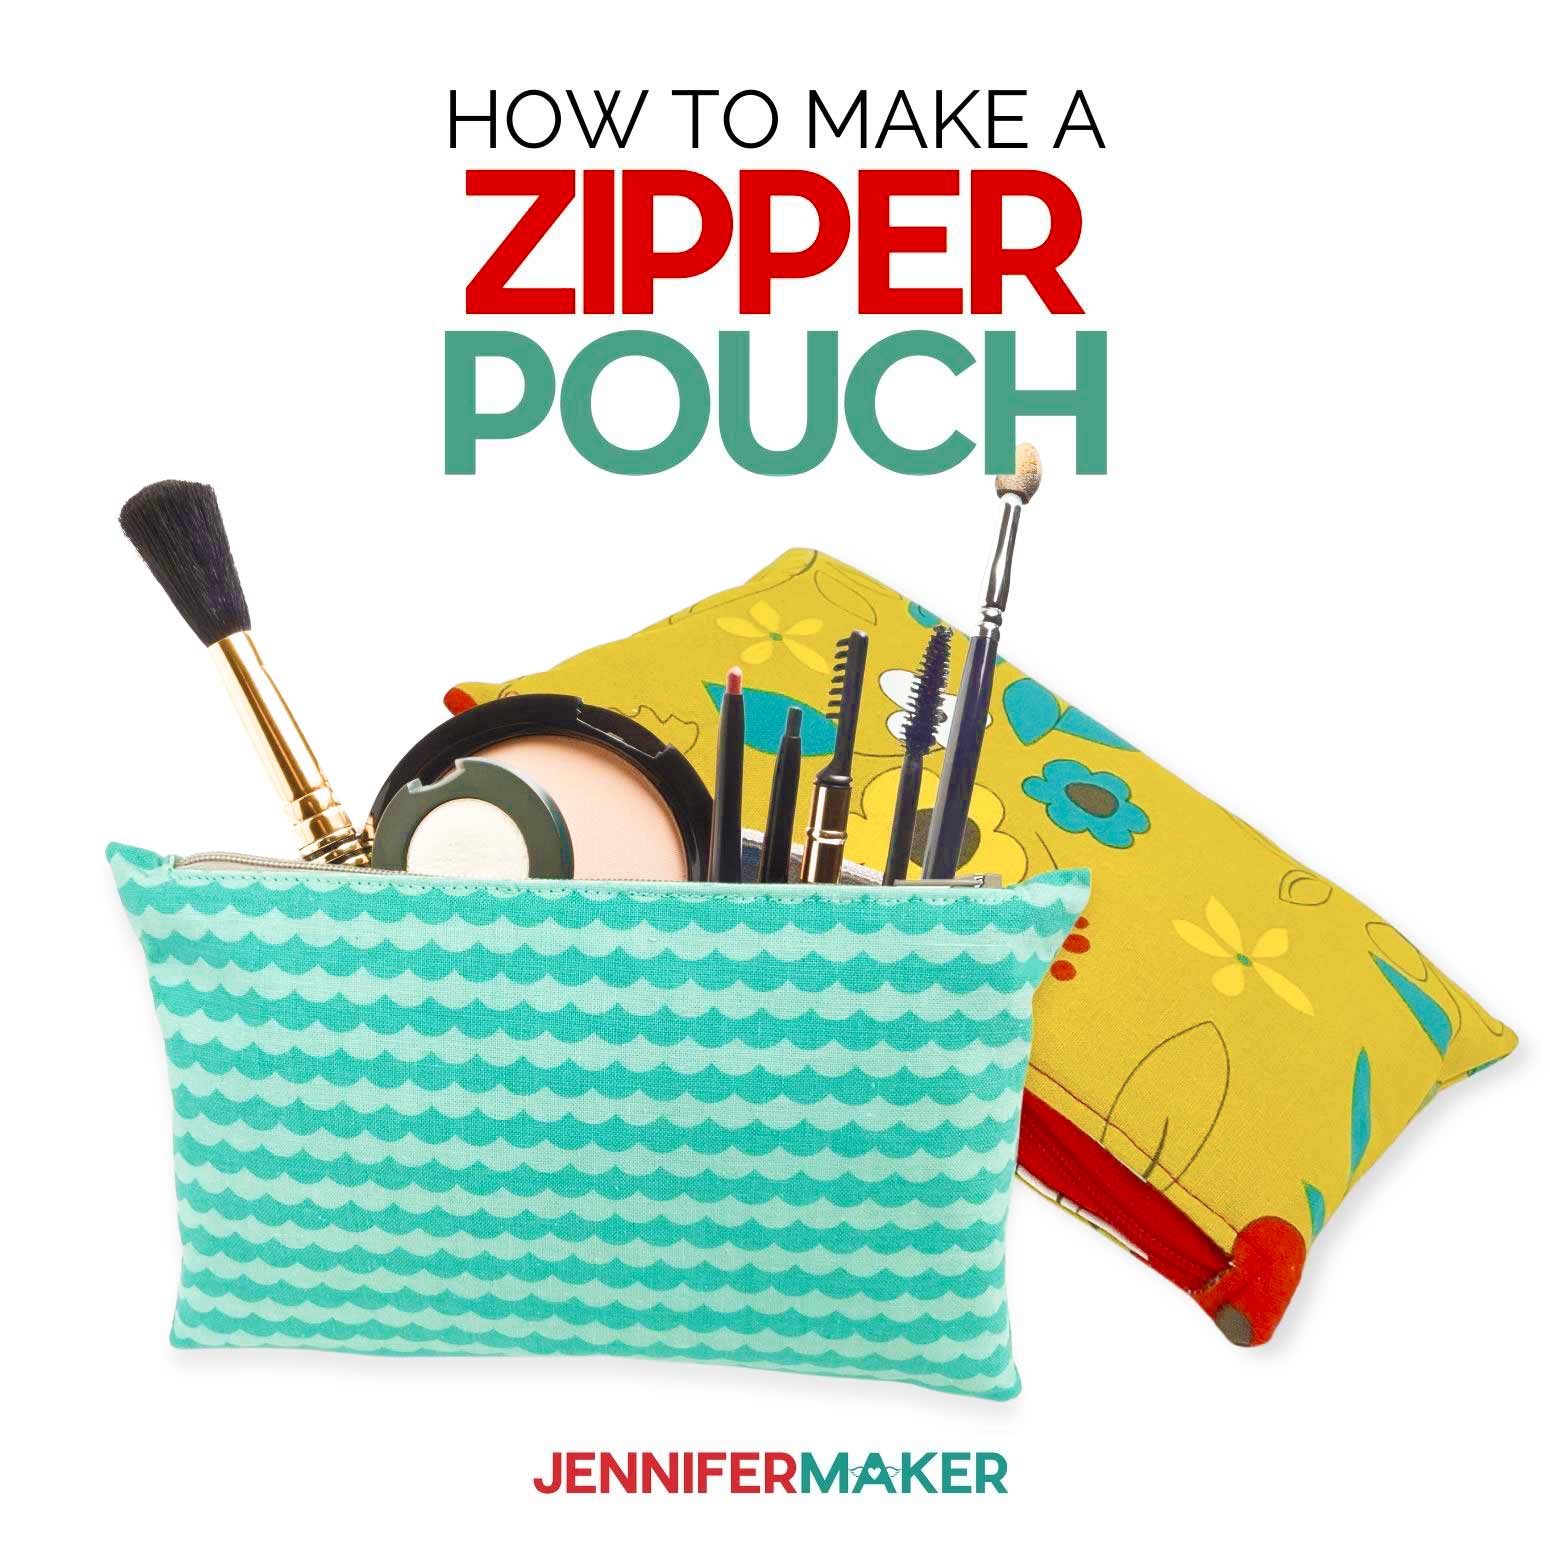 DIY Zipper Pouch with Makeup powder and brushes sticking out from inside